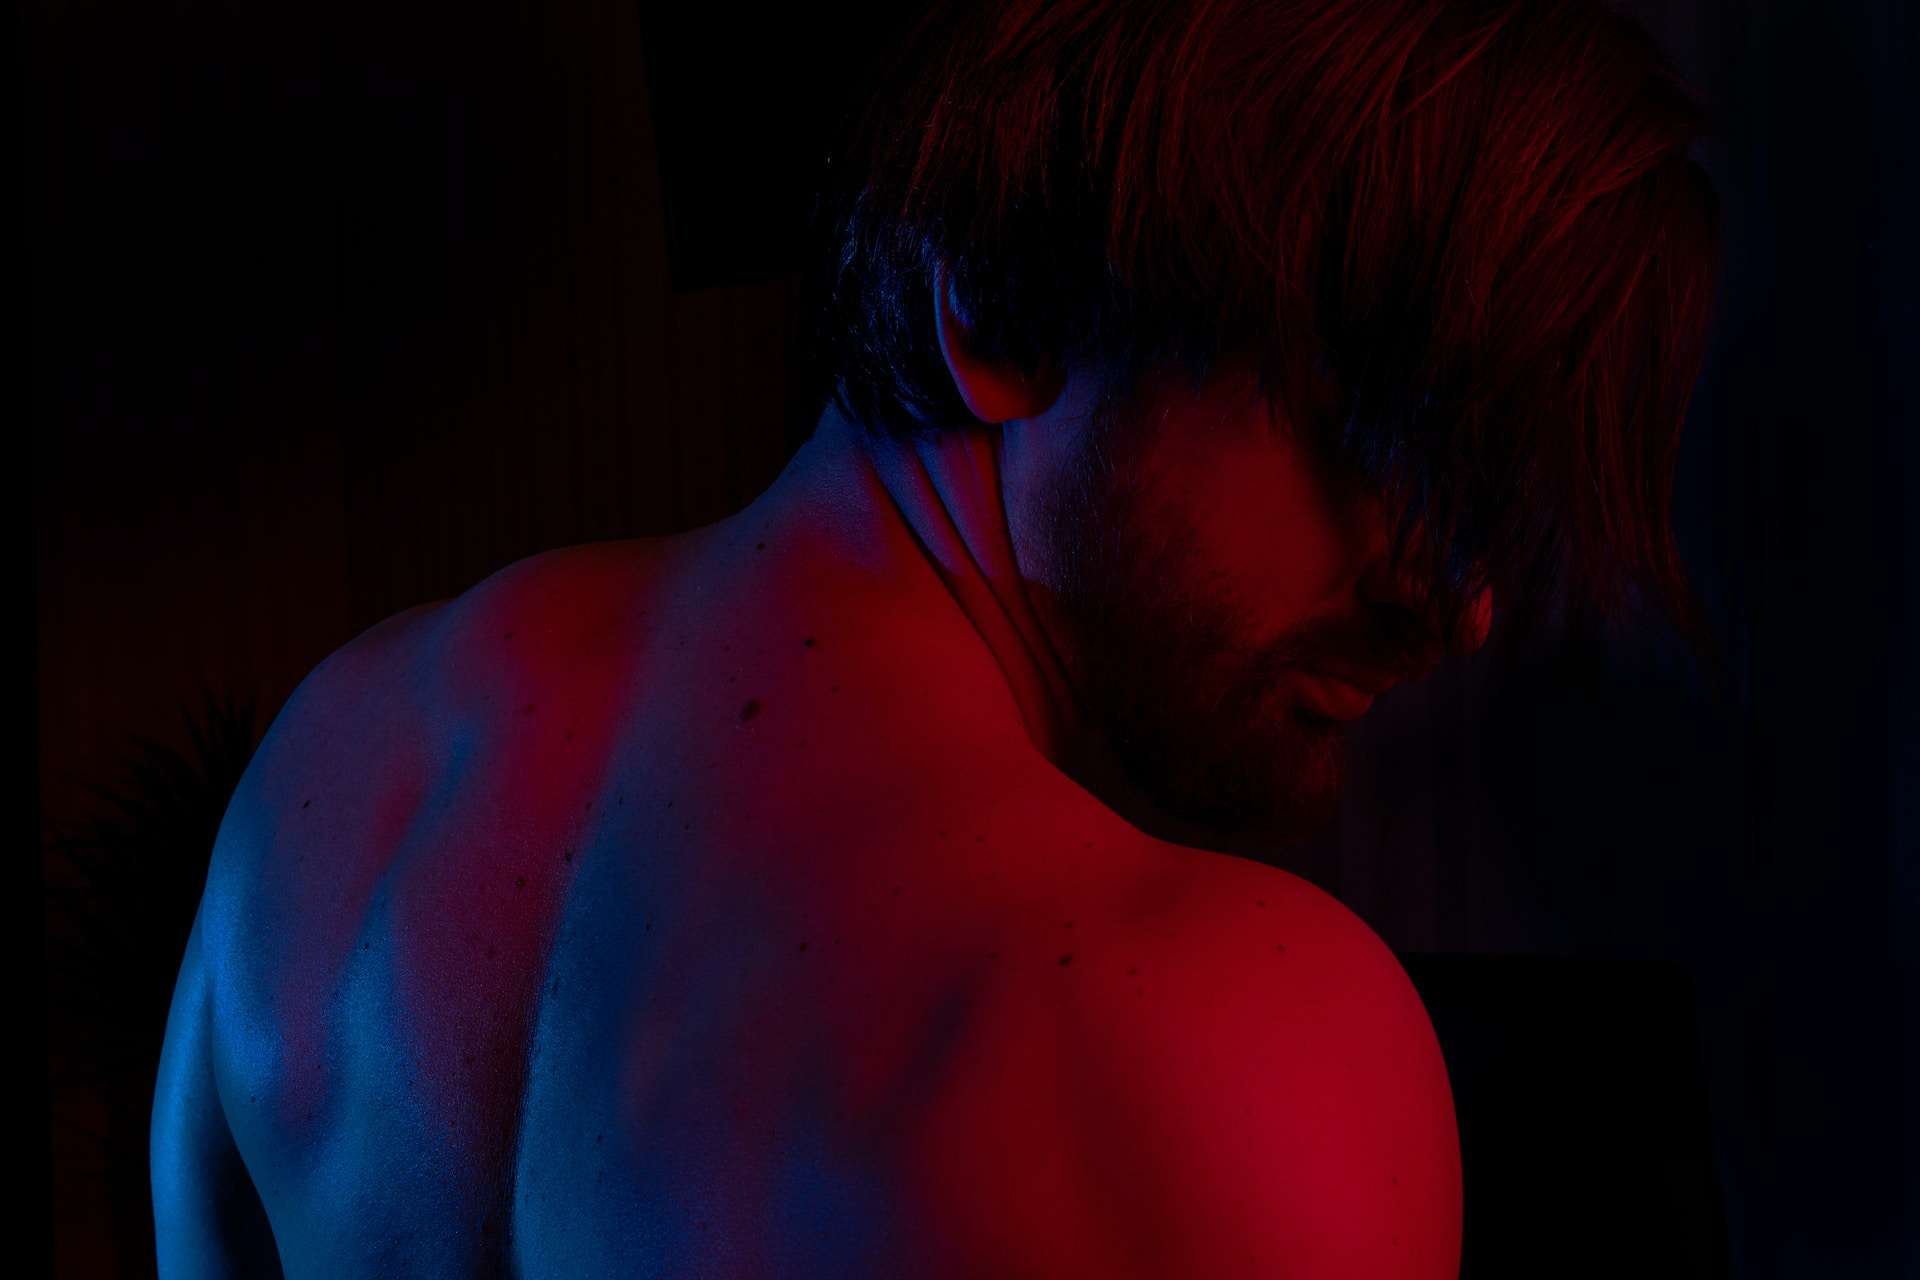 image of a shirtless man with his upper back in frame facing the camera and slightly turned head. He is in a dark space with a red light glowing in his skin.